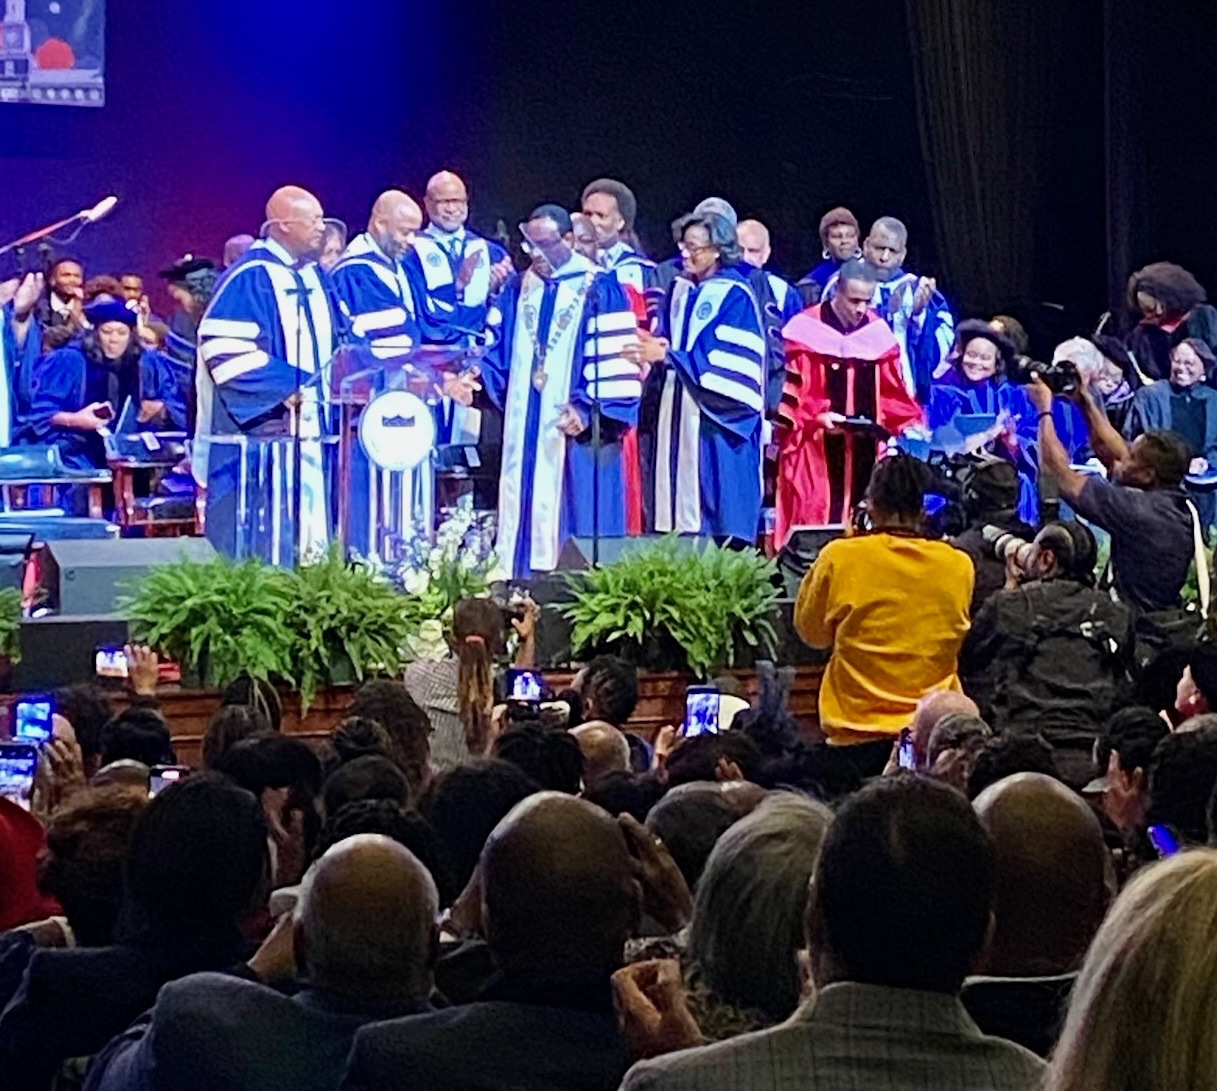 President Vinson is on the stage in academic garb, surrouned by members of the faculty. Many audience members are seated.